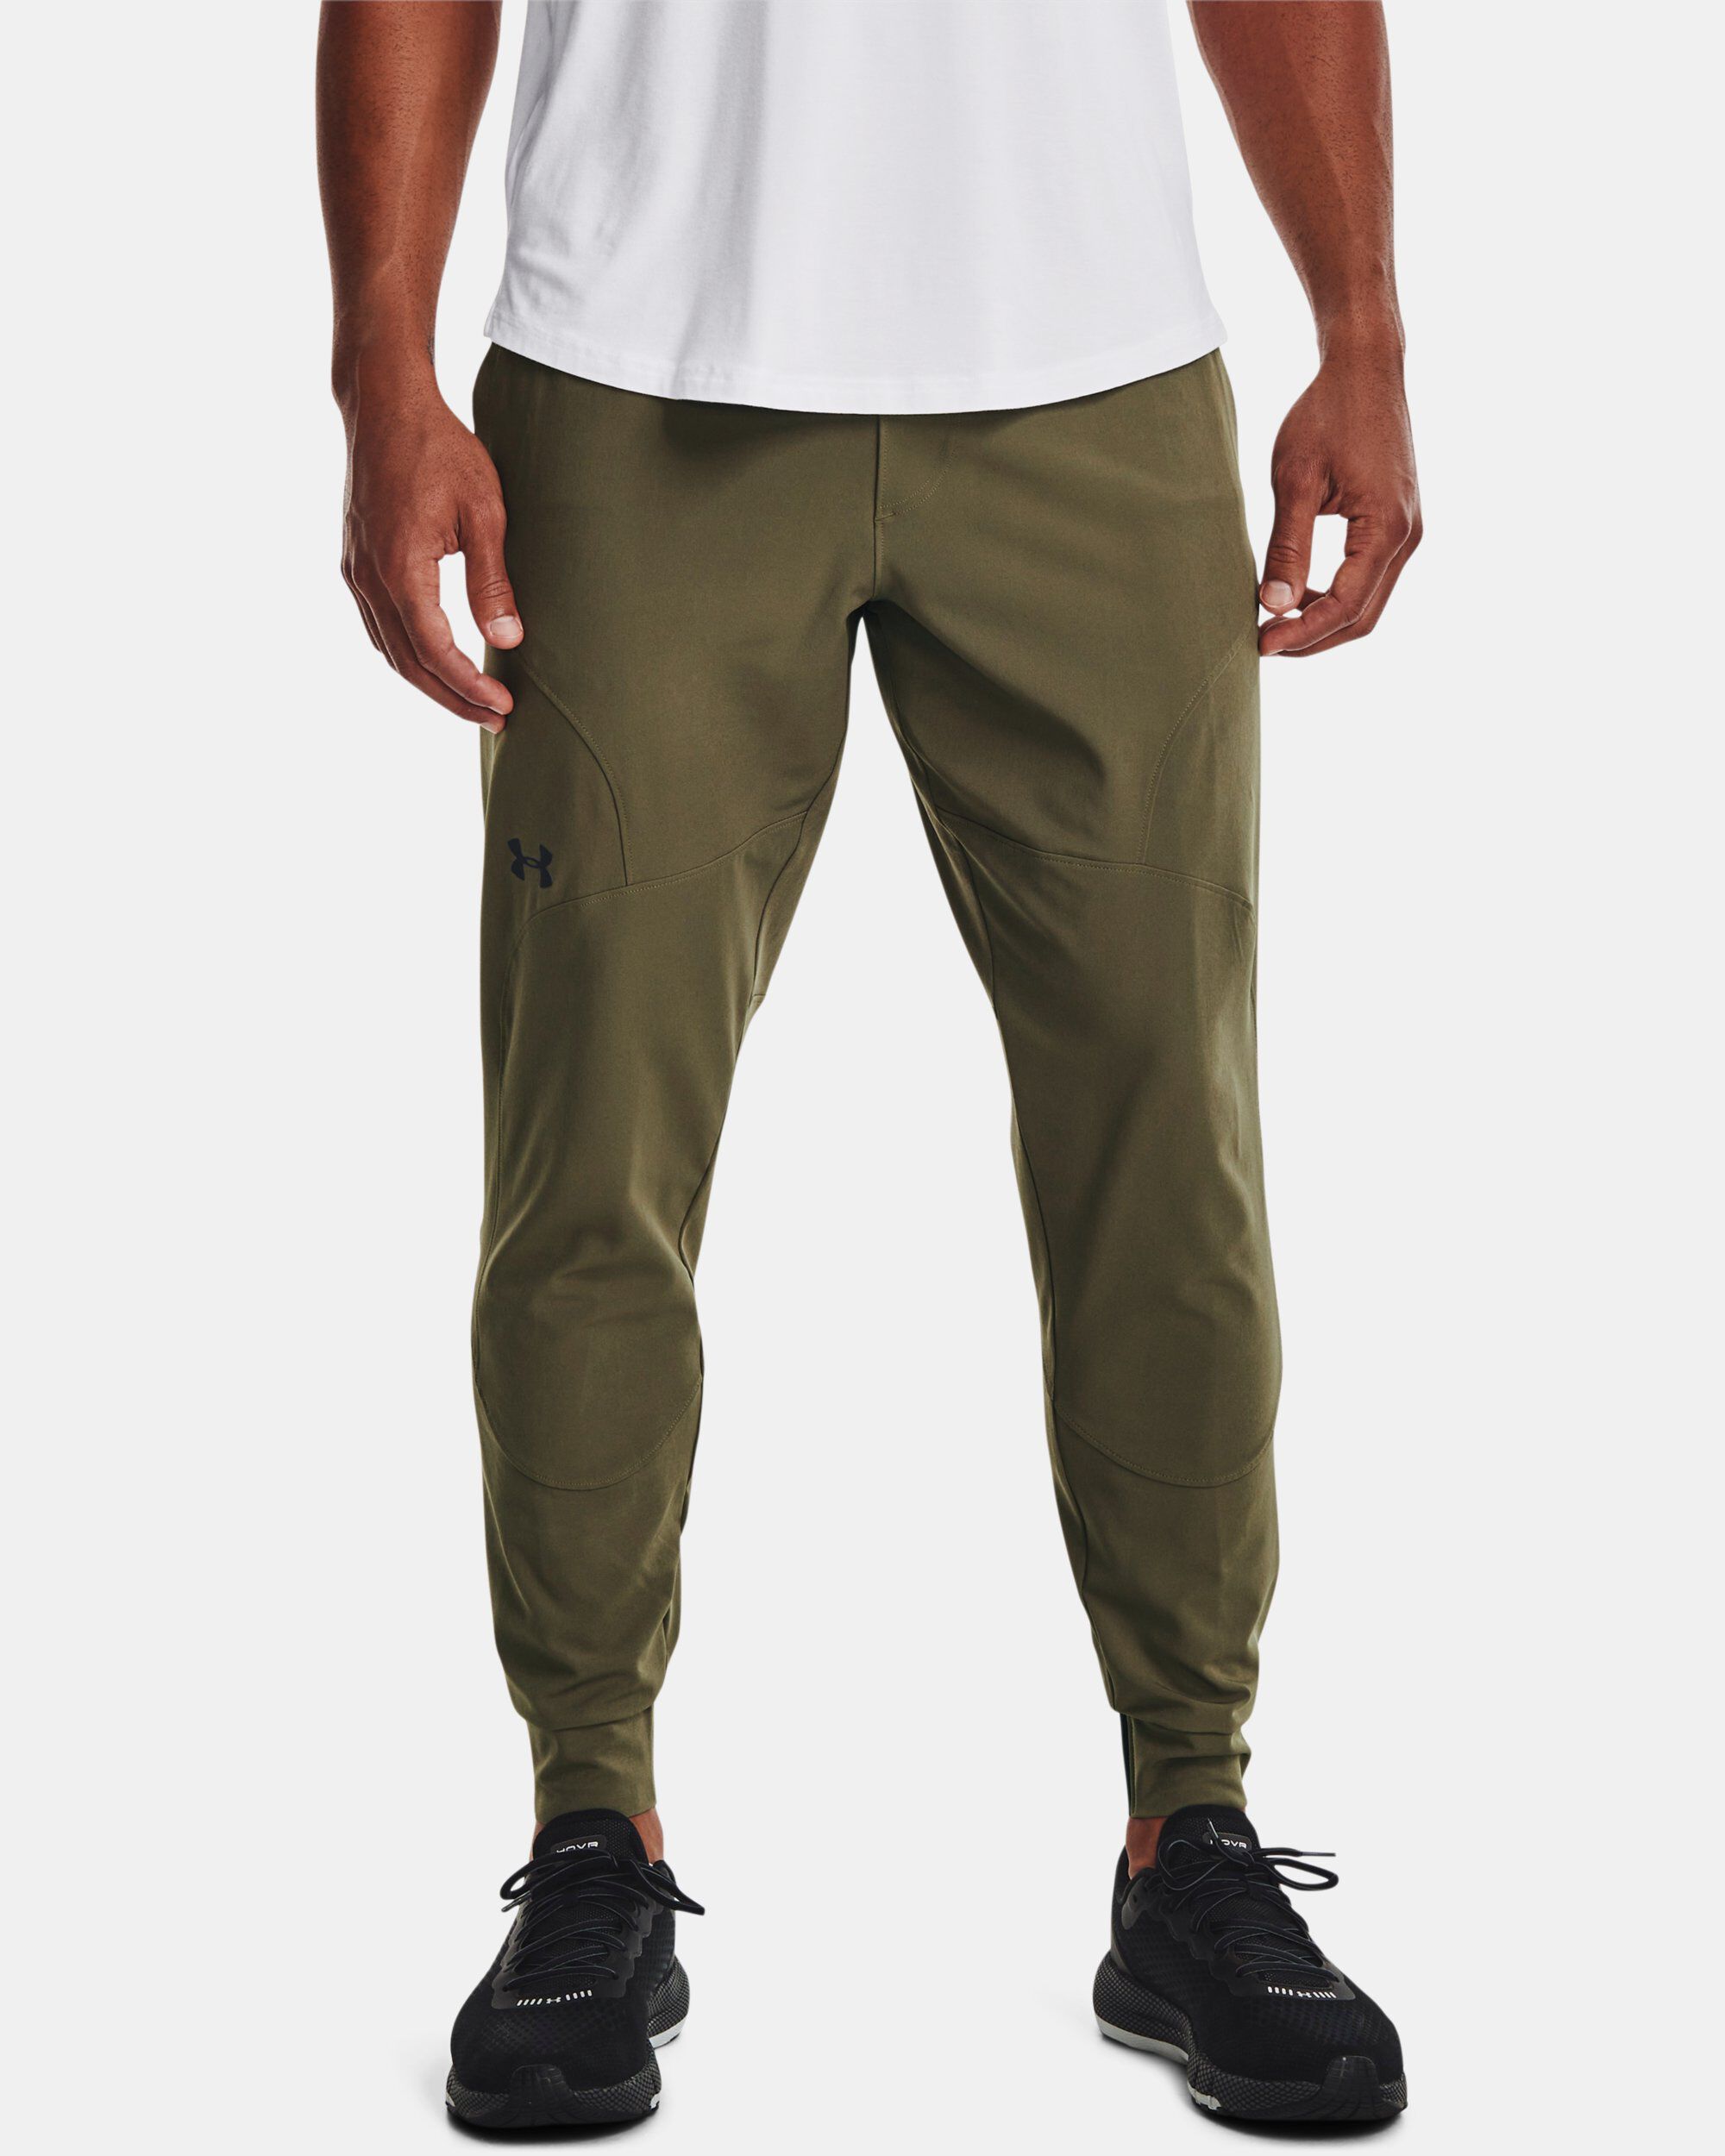 Outlet in Dubai, UAE | Buy Online | Under Armour